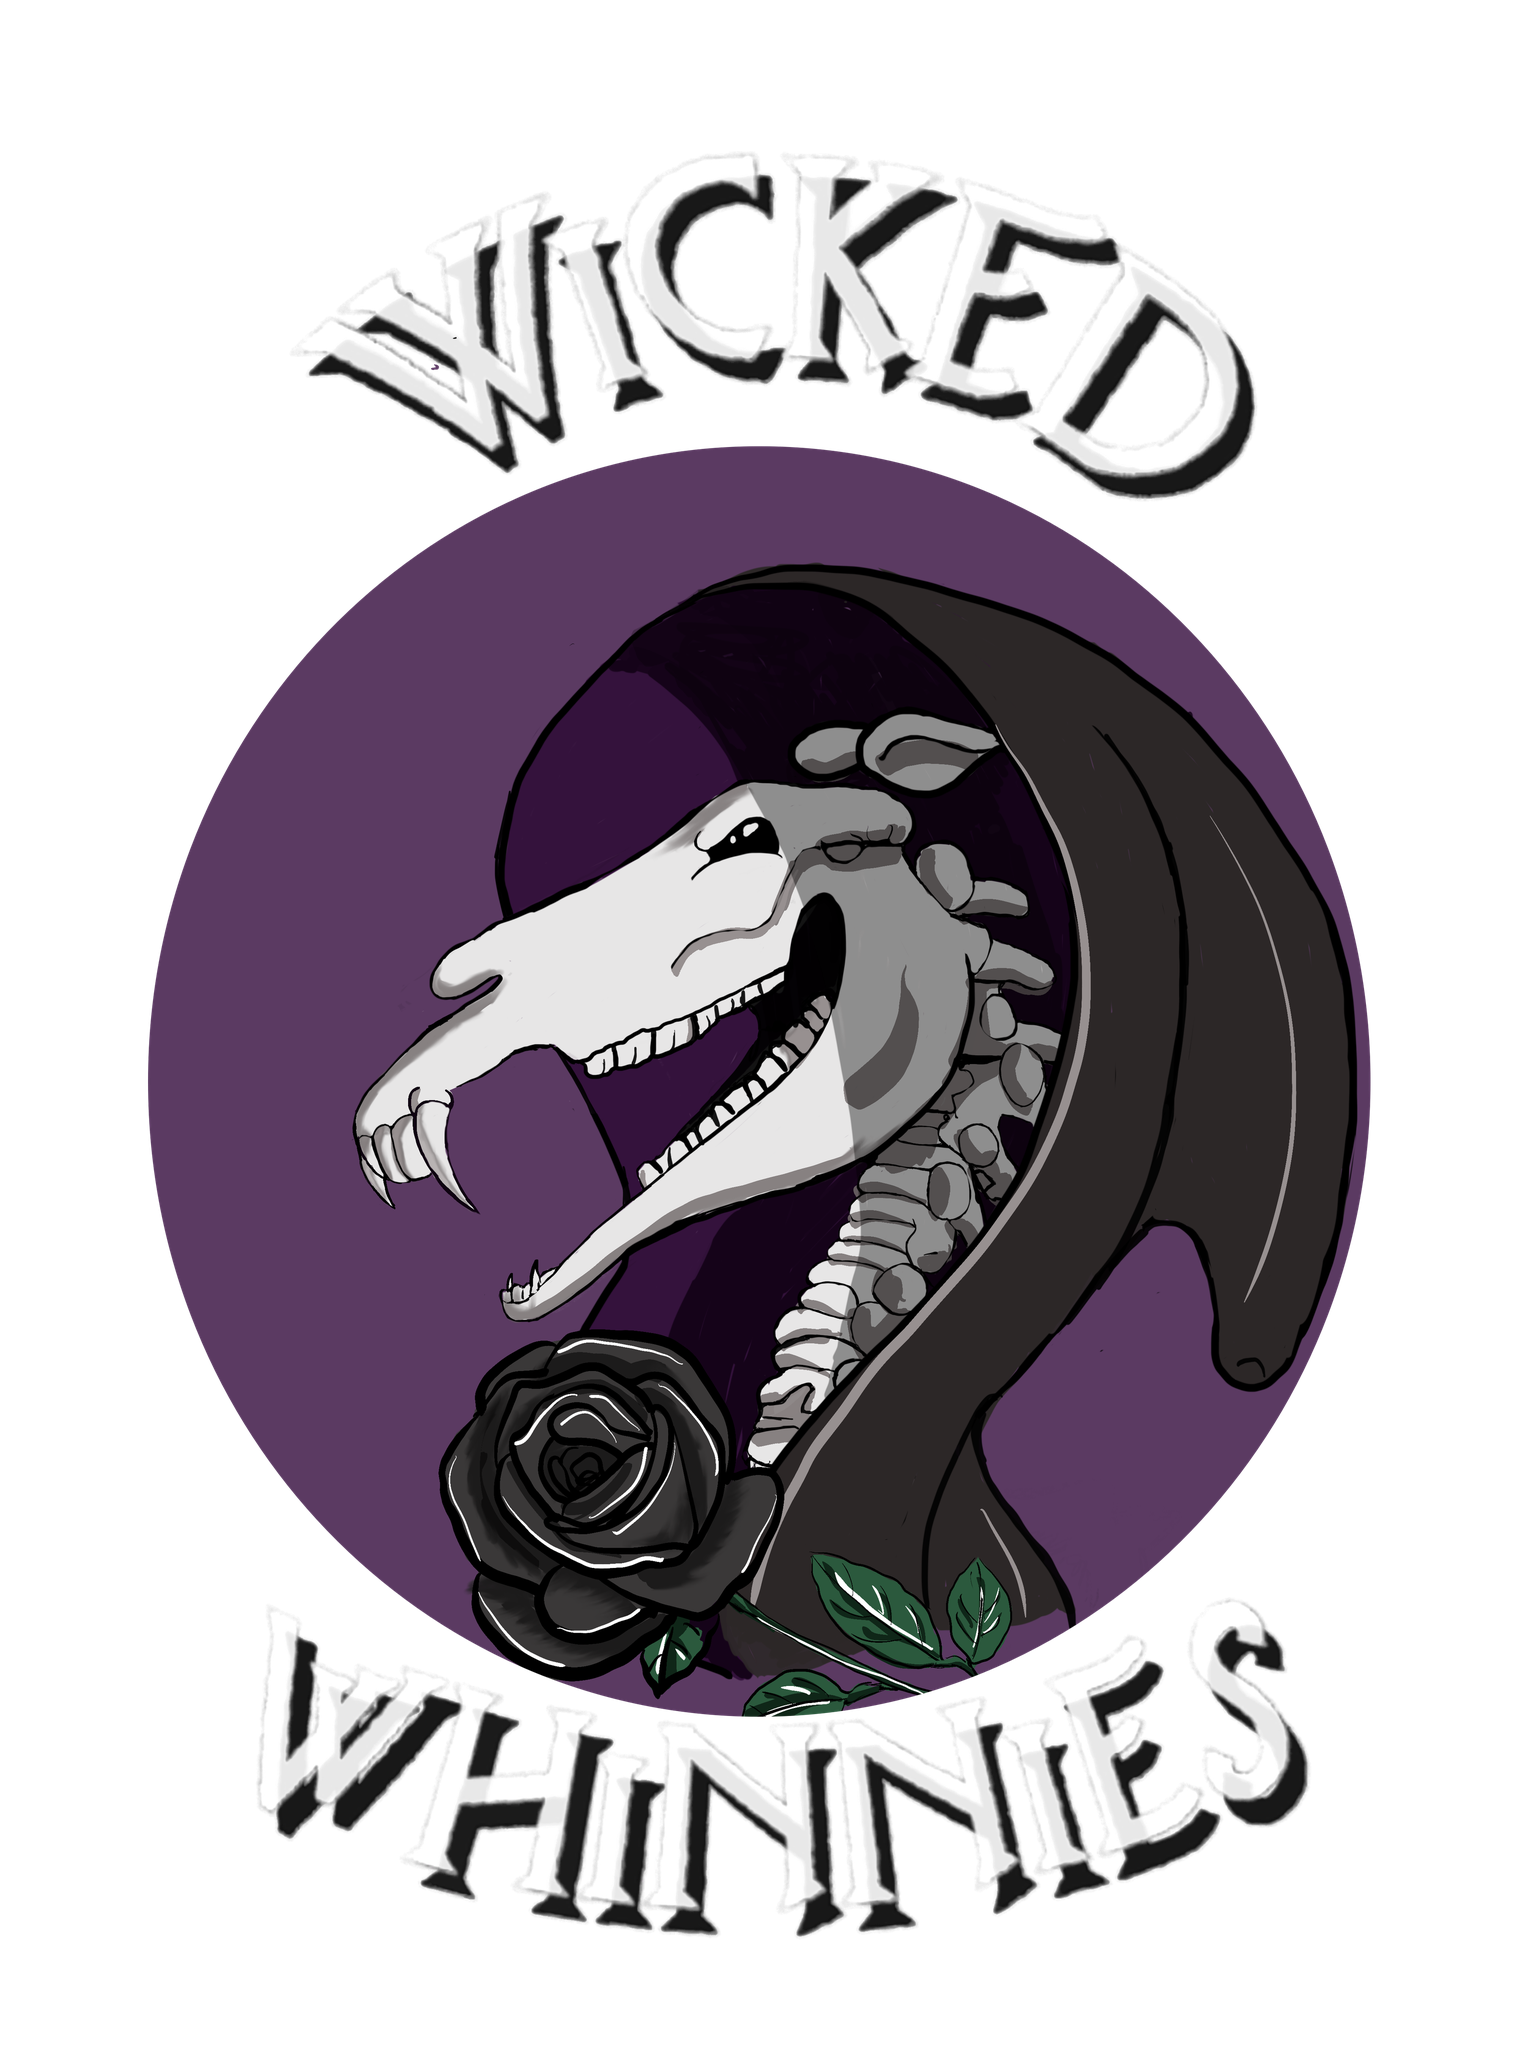 Wicked Whinnies